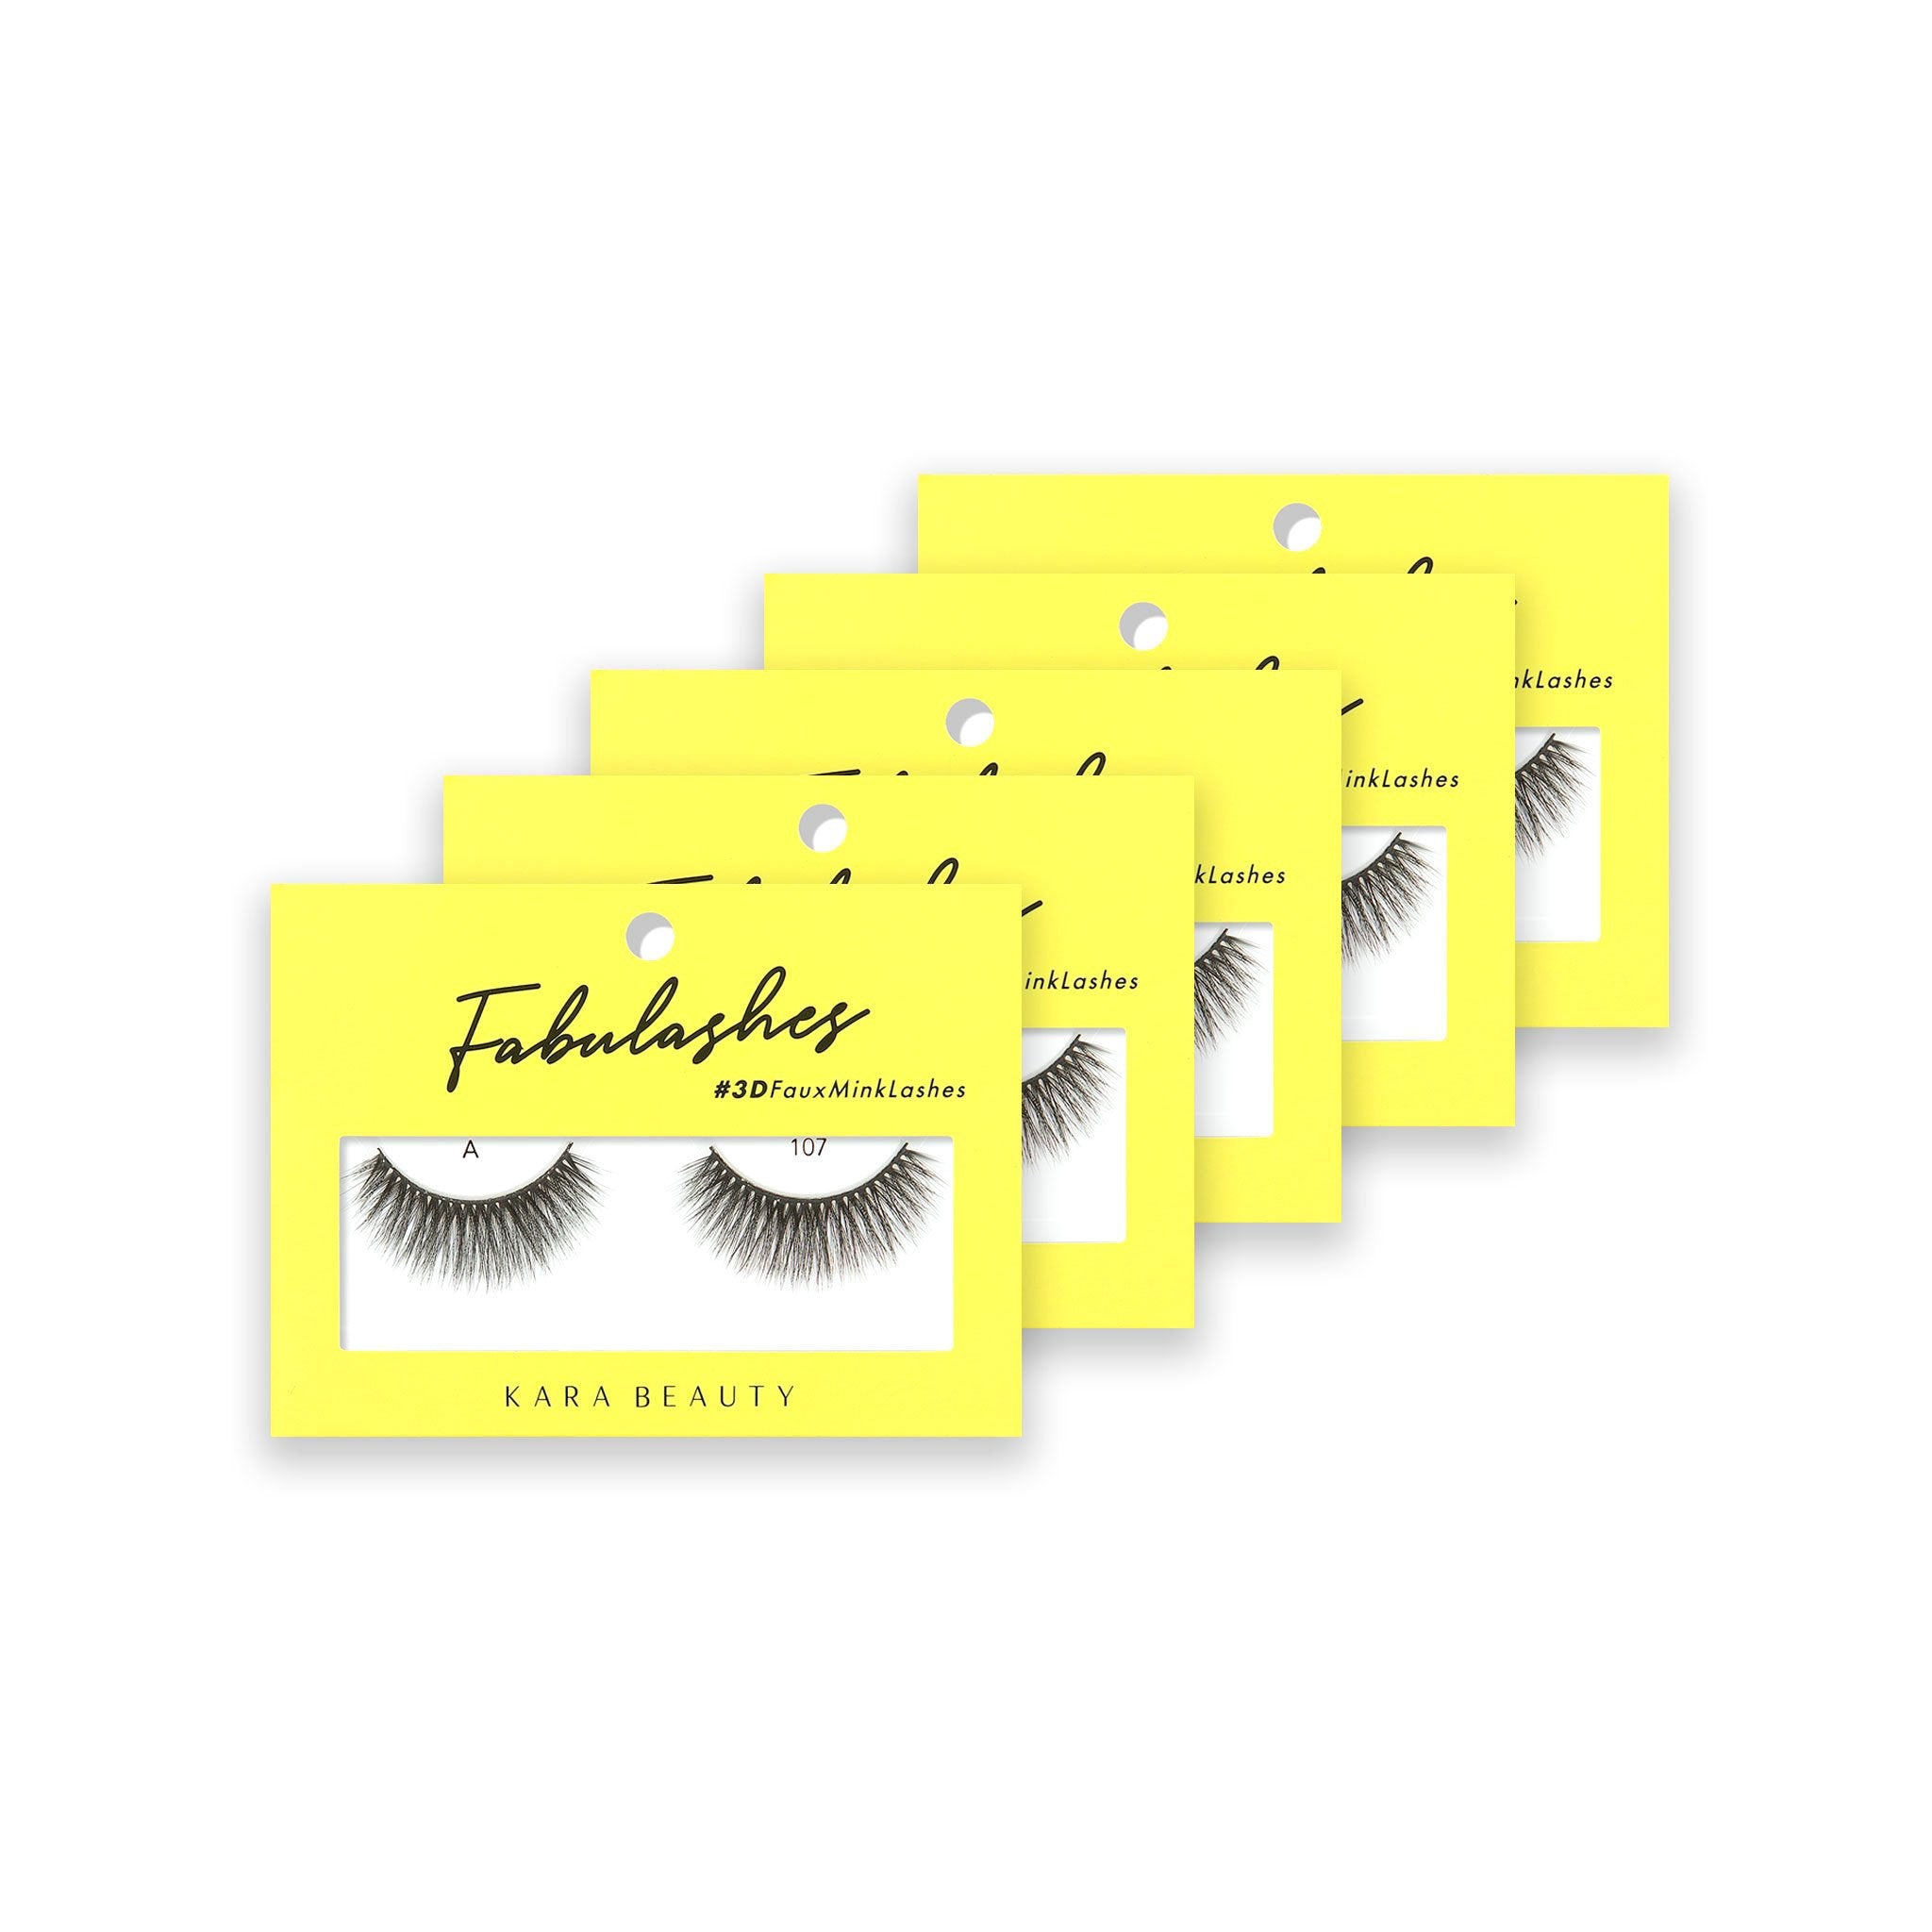 Style A107 Fabulashes 3D Faux Mink Strip Eyelashes 5 pack